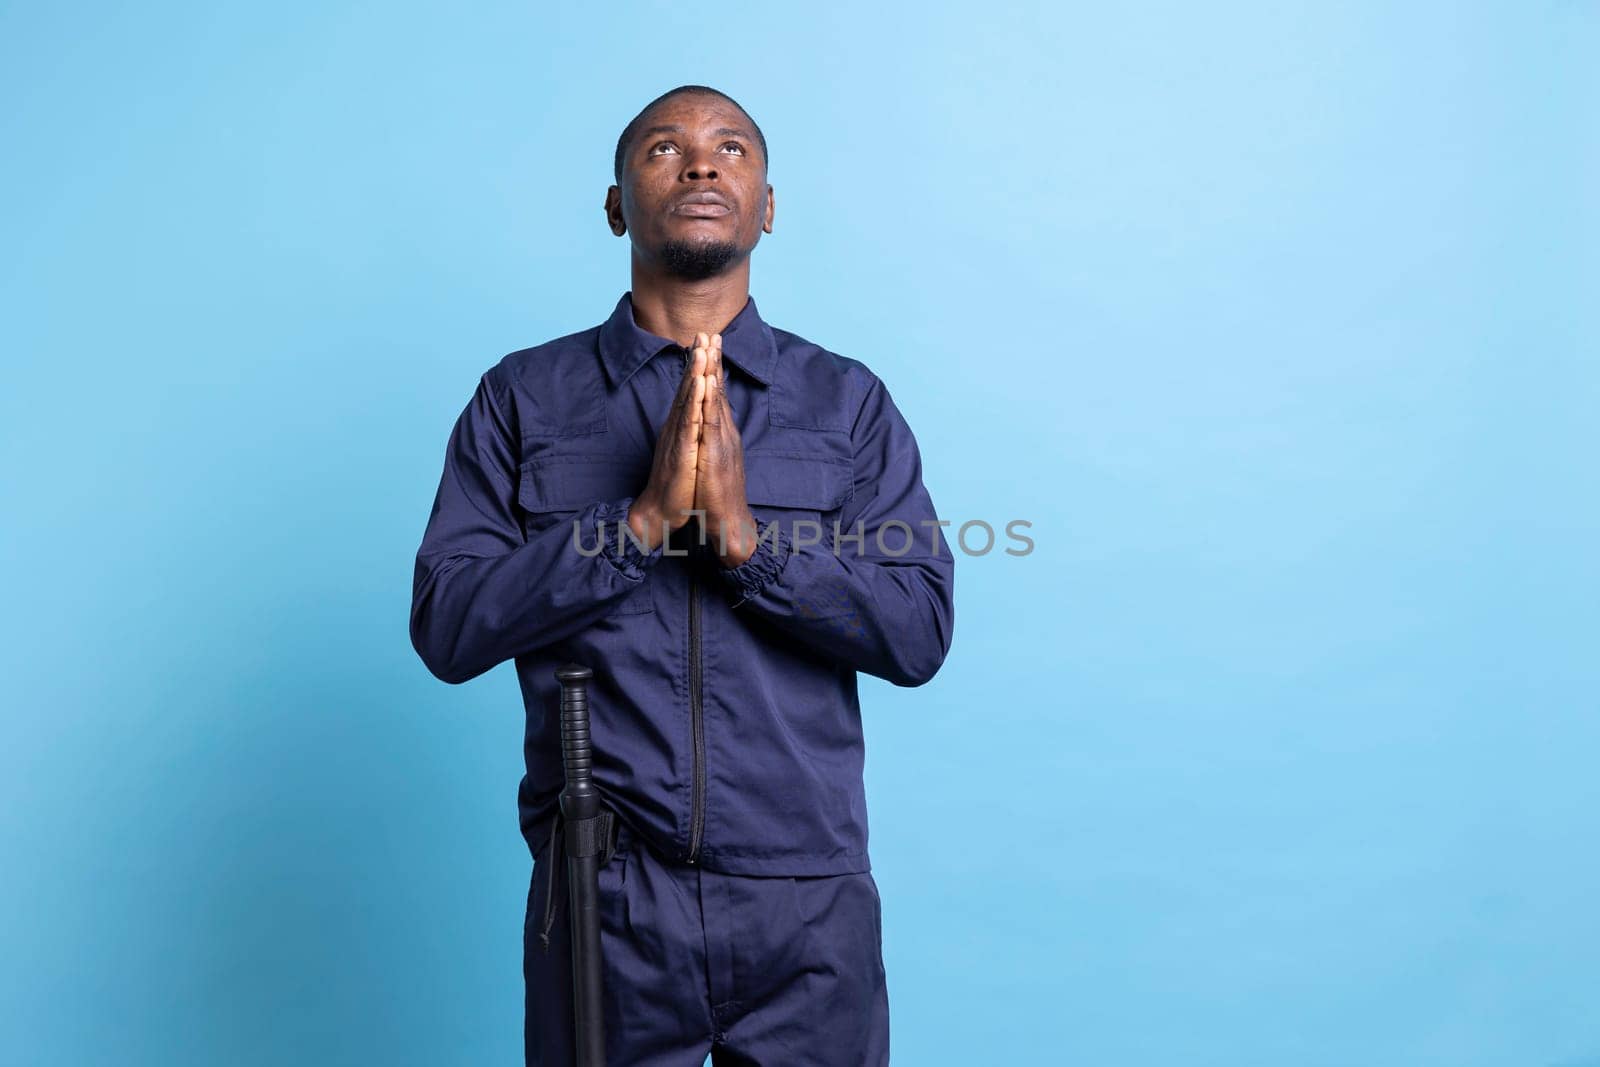 Religious security agent praying to God and having faith against blue background by DCStudio